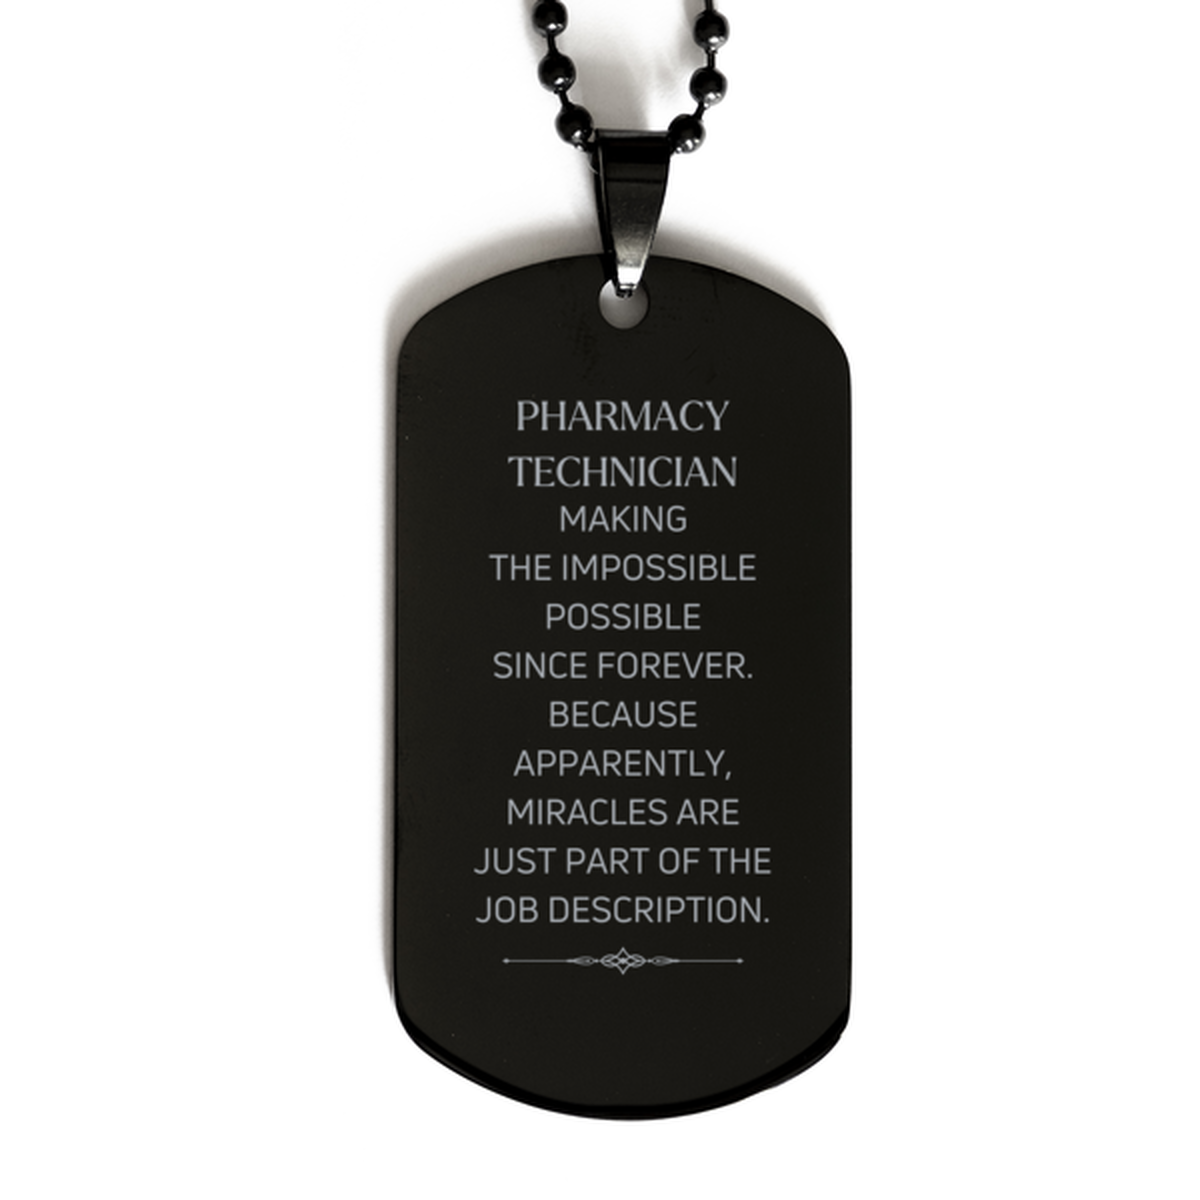 Funny Pharmacy Technician Gifts, Miracles are just part of the job description, Inspirational Birthday Black Dog Tag For Pharmacy Technician, Men, Women, Coworkers, Friends, Boss